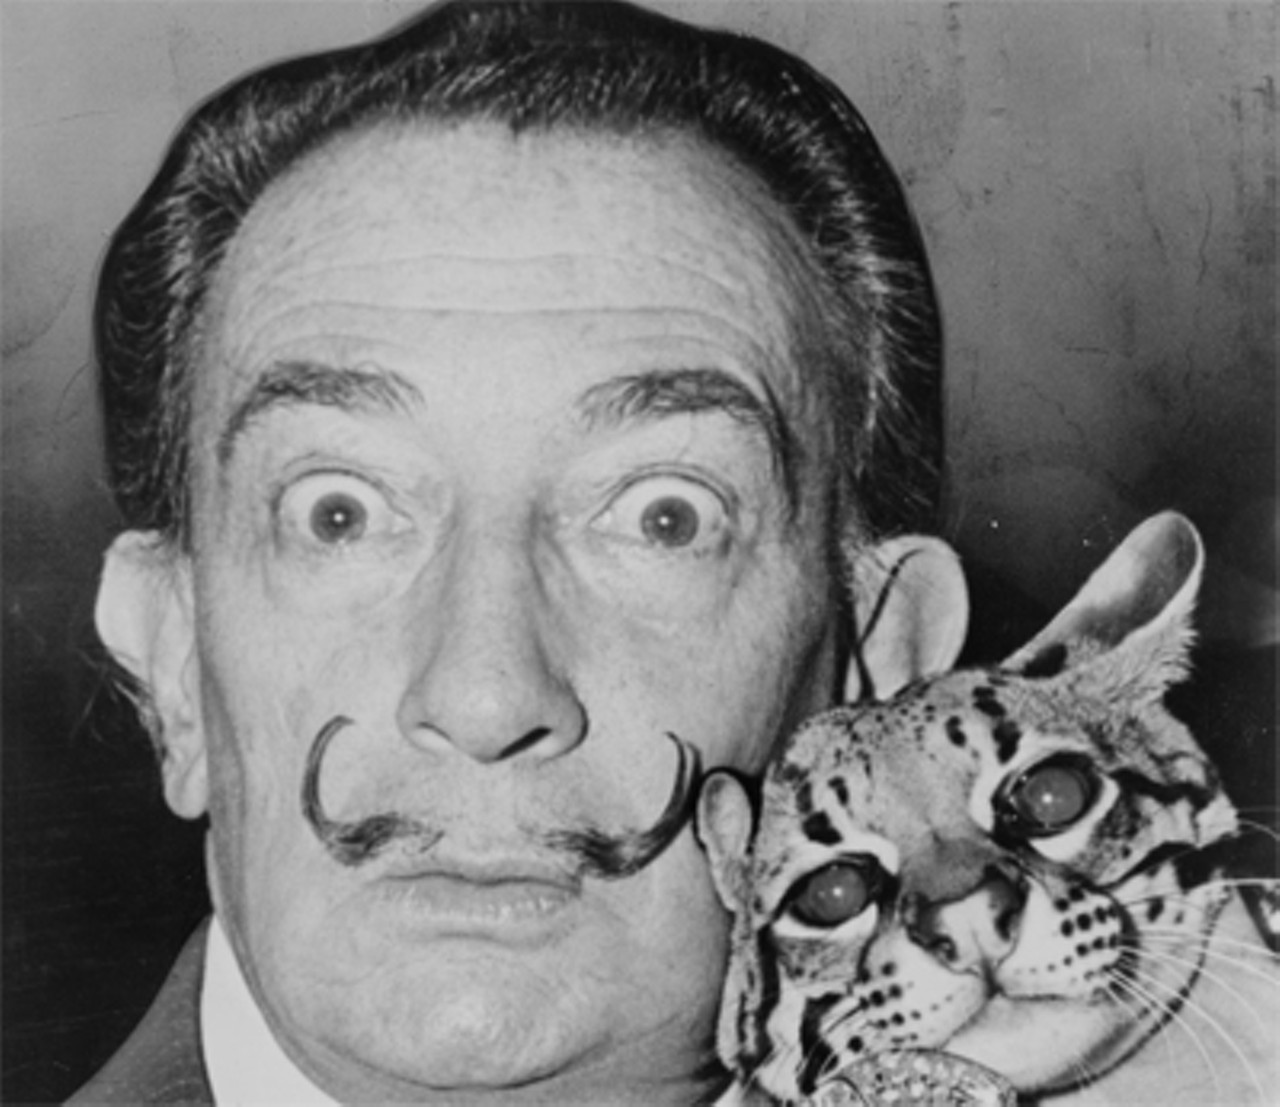 Another surrealist painter, another mustache. Salvador Dali (1904-1989), best known for striking and bizarre images in his paintings. Also known for a handlebar mustache.